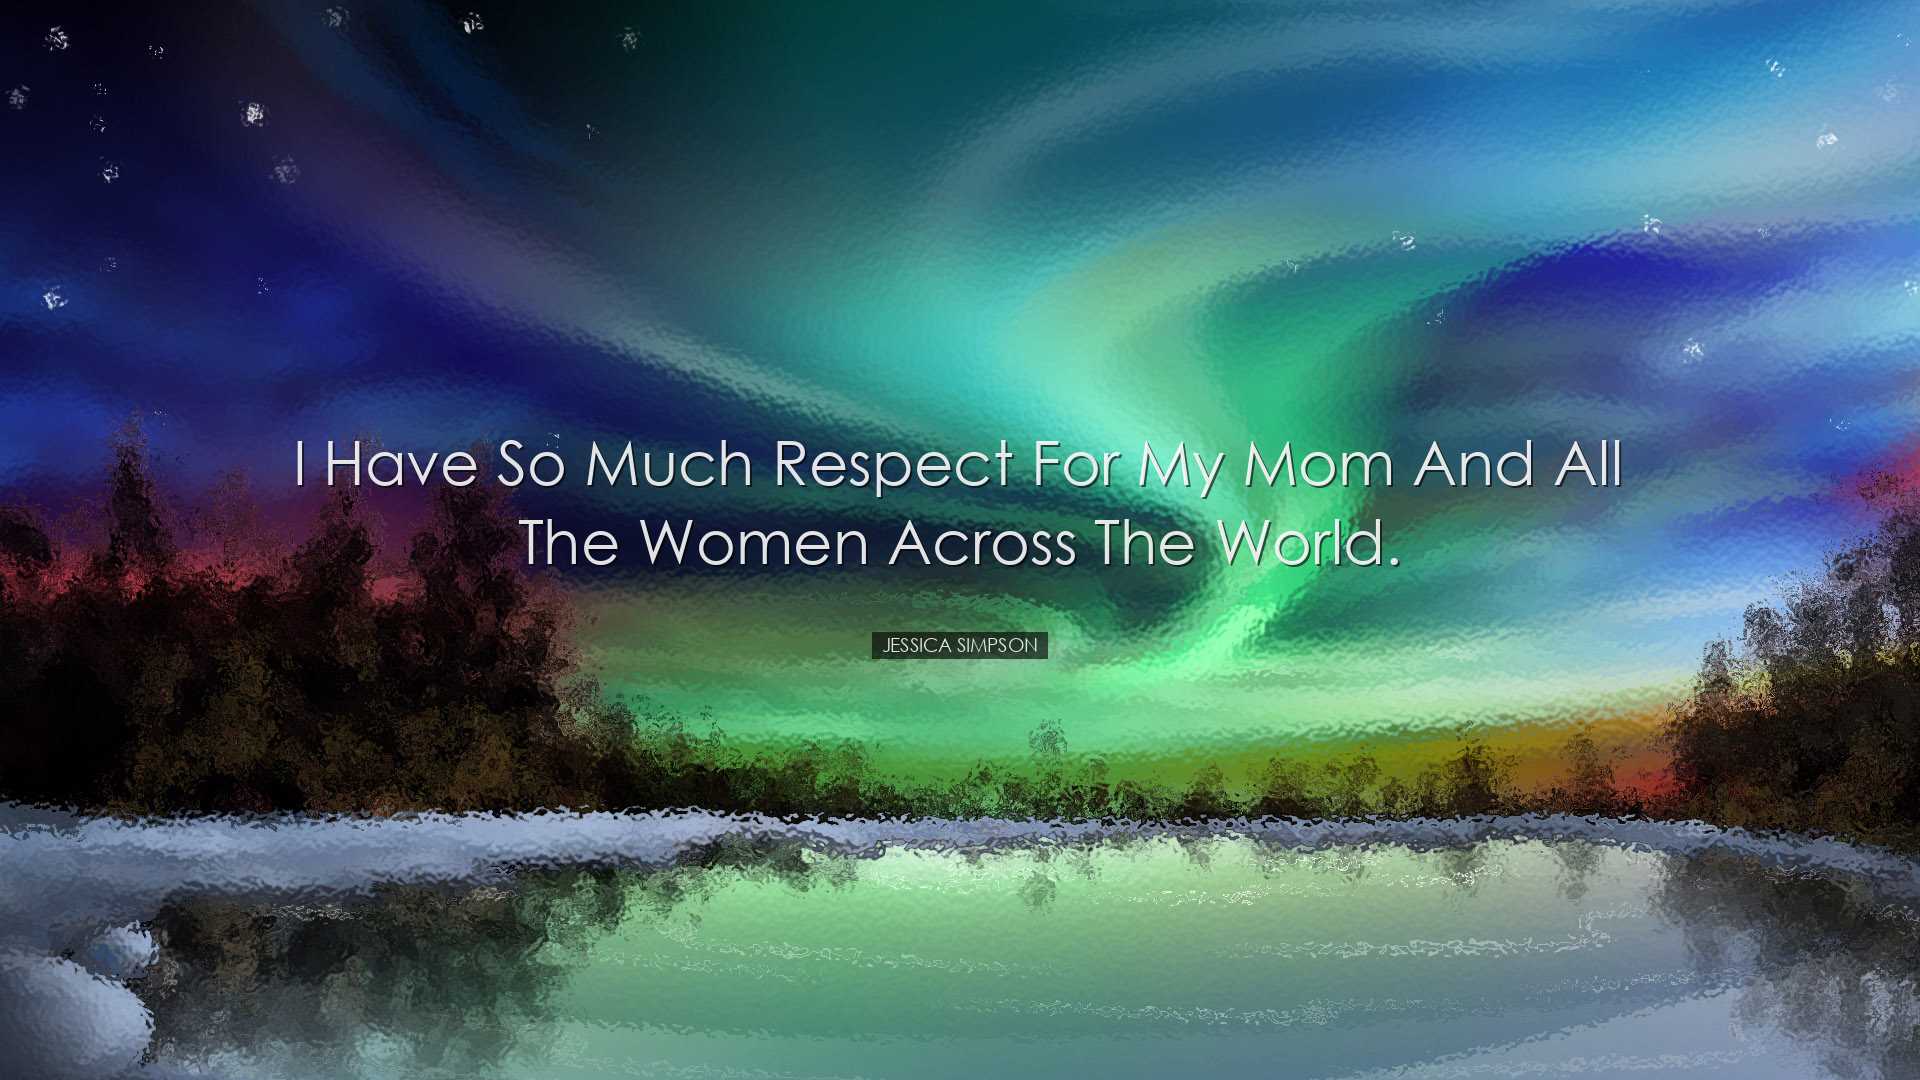 I have so much respect for my mom and all the women across the wor